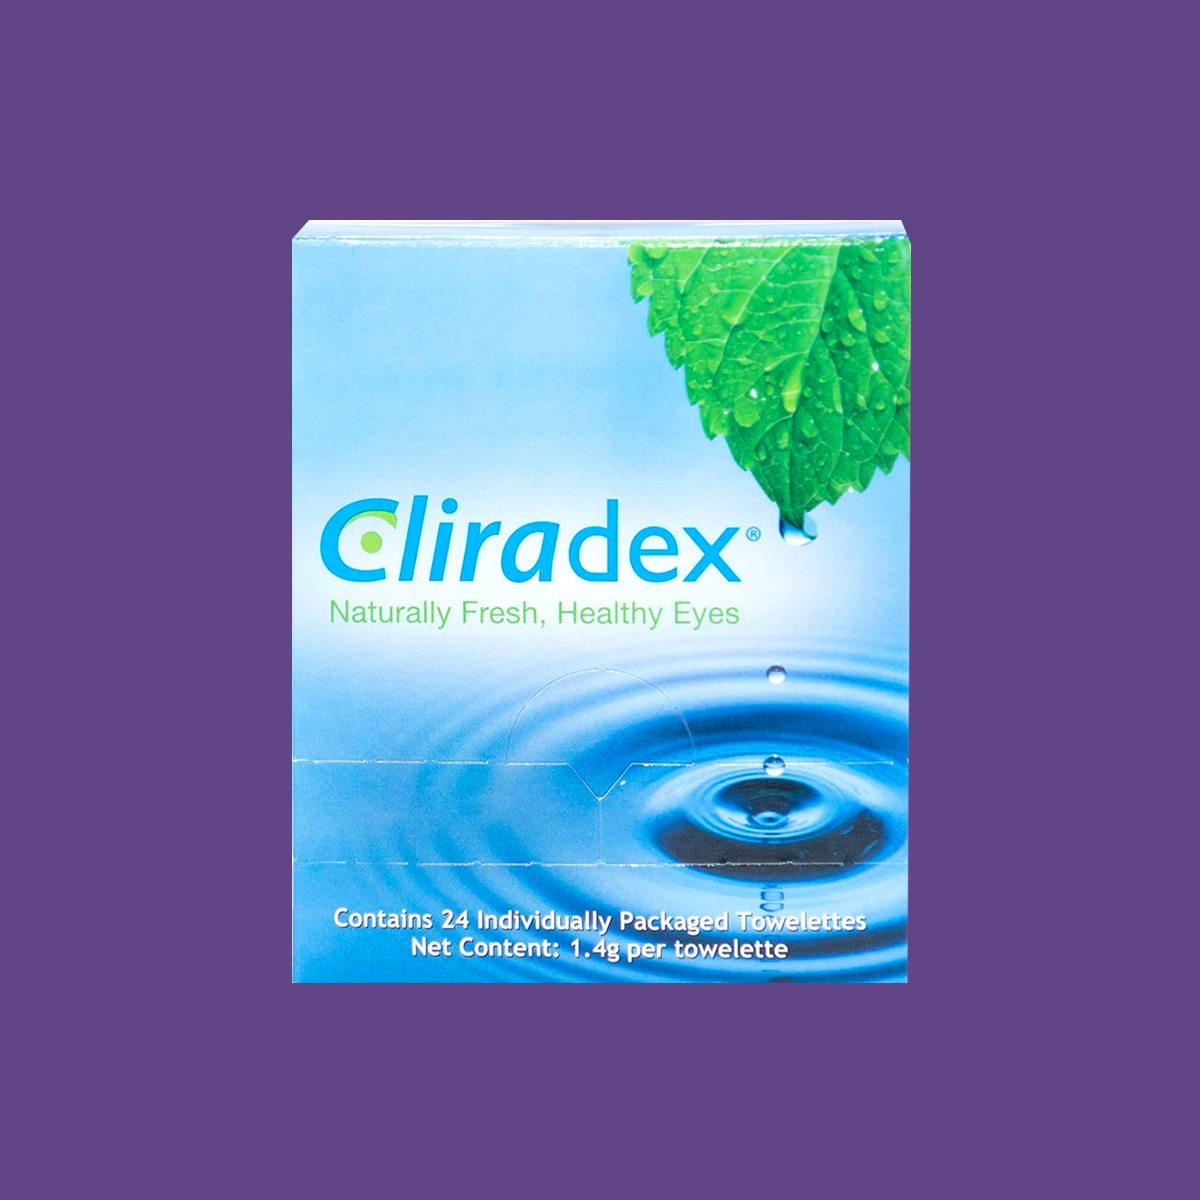 Cliradex Wipes - Tea Tree Oil Extract Eyelid Cleanser for Demodex, Blepharitis and Dry Eye (24ct)